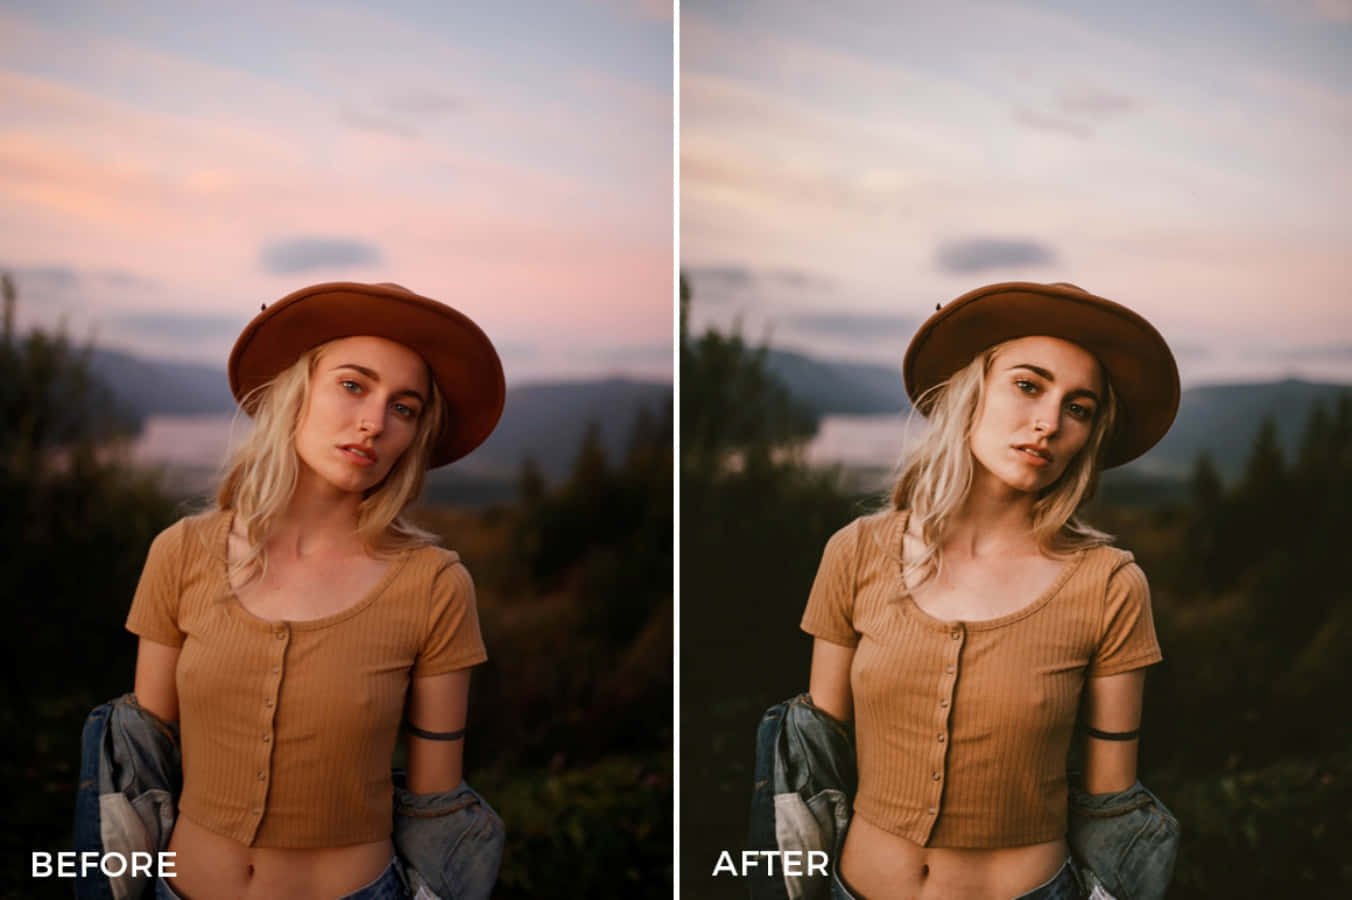 "Instantly Enhance Your Photos with Lightroom Presets"